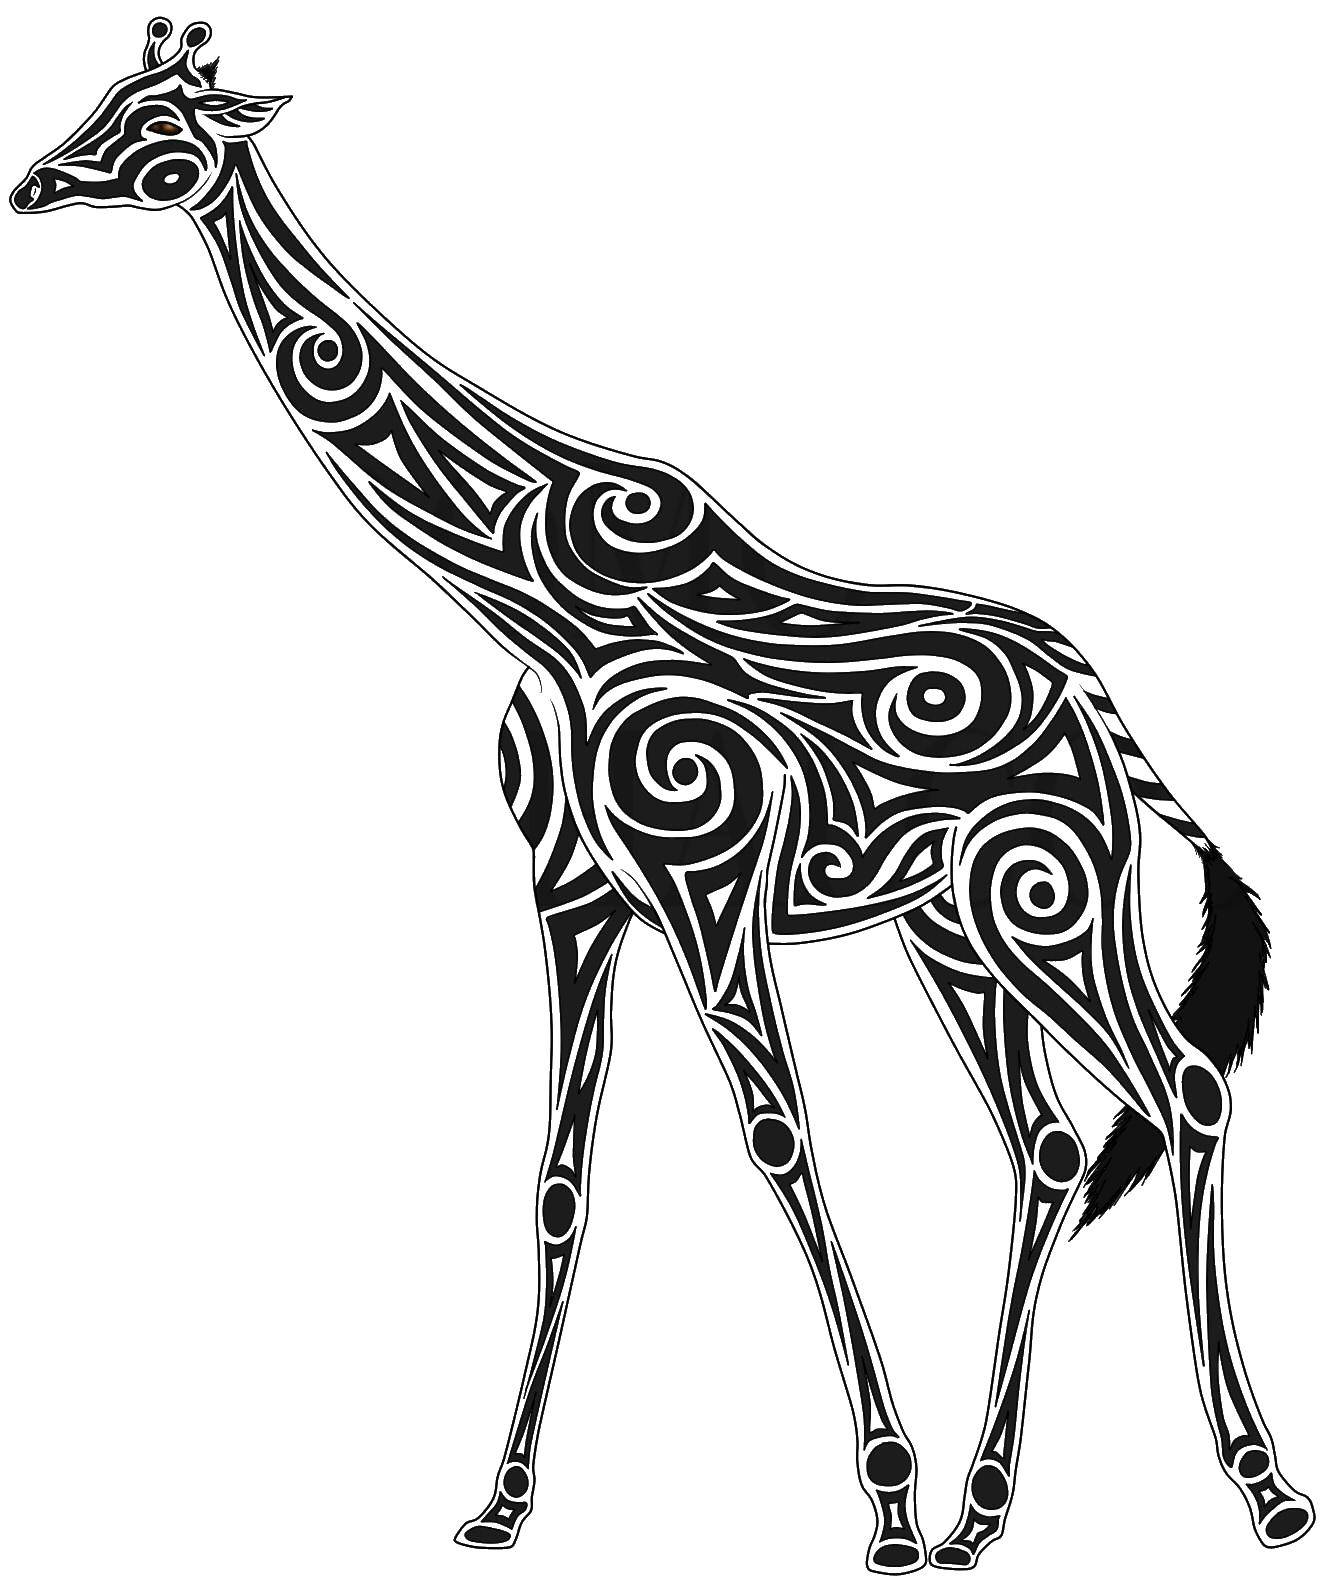 Coloring African giraffe. Category coloring. Tags:  wild animals, zoo, Africa, giraffe.